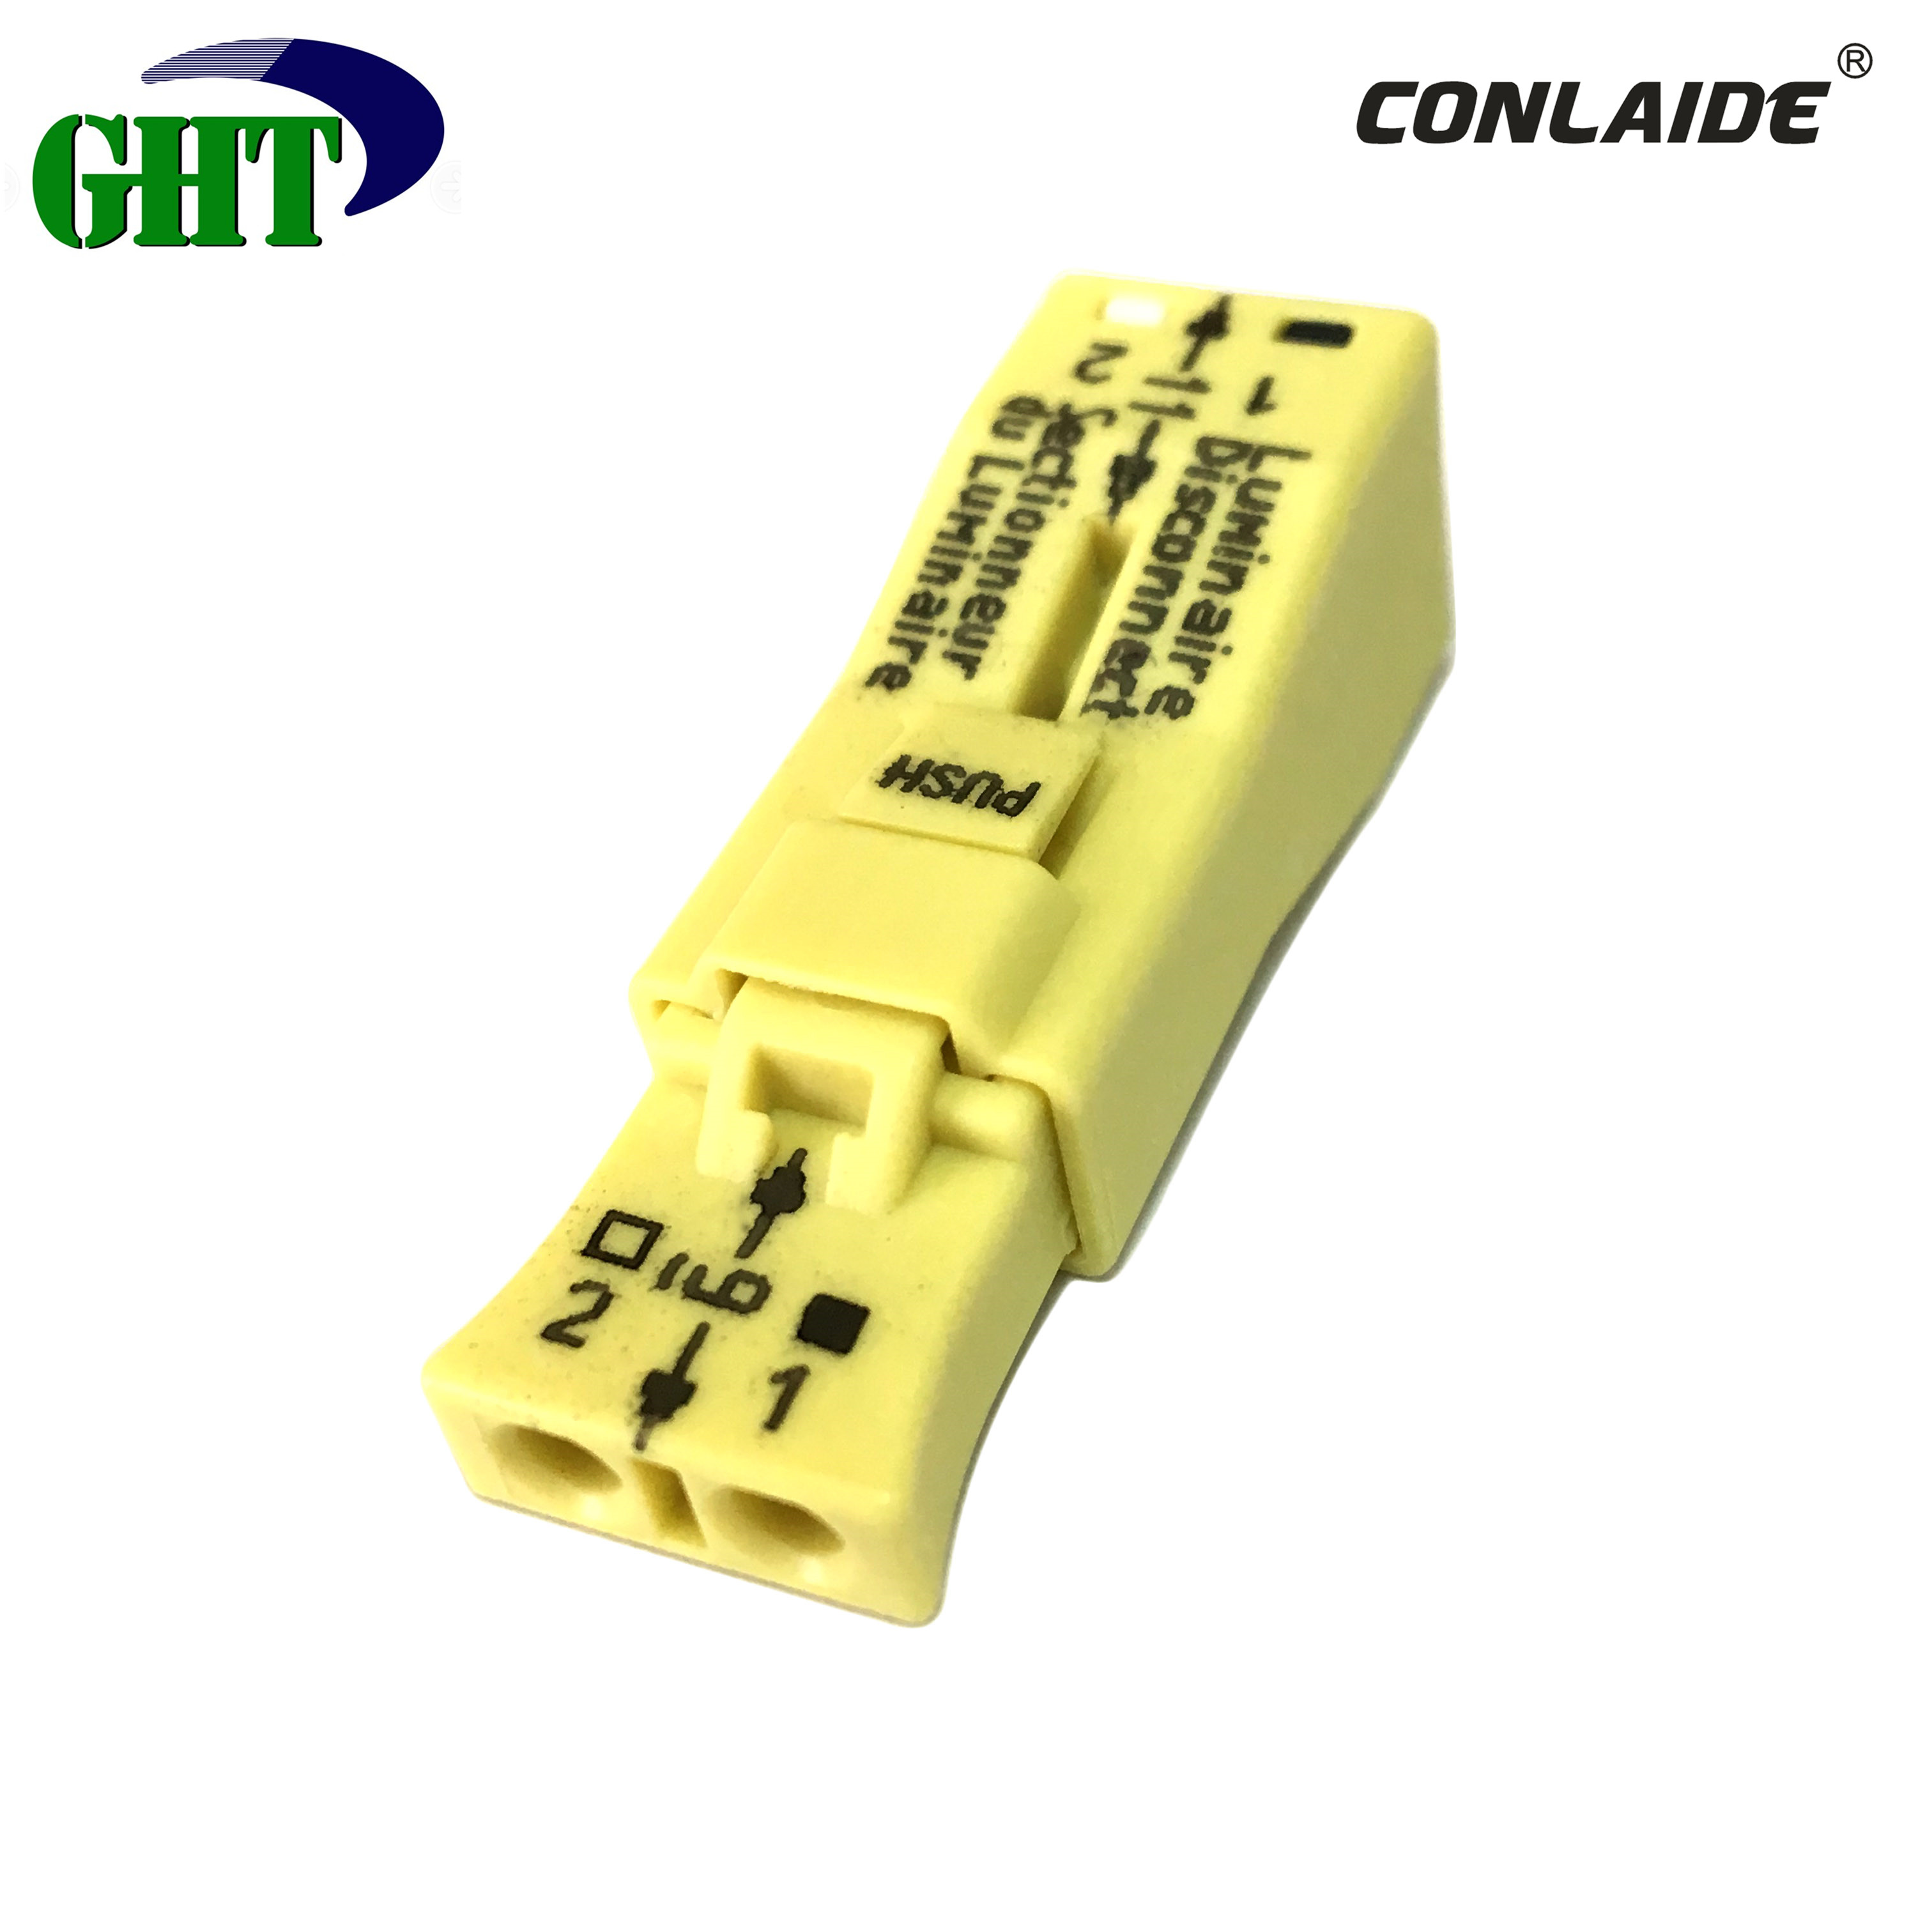 873-853 3 Pole Luminaire disconnect connector with preceding ground contact